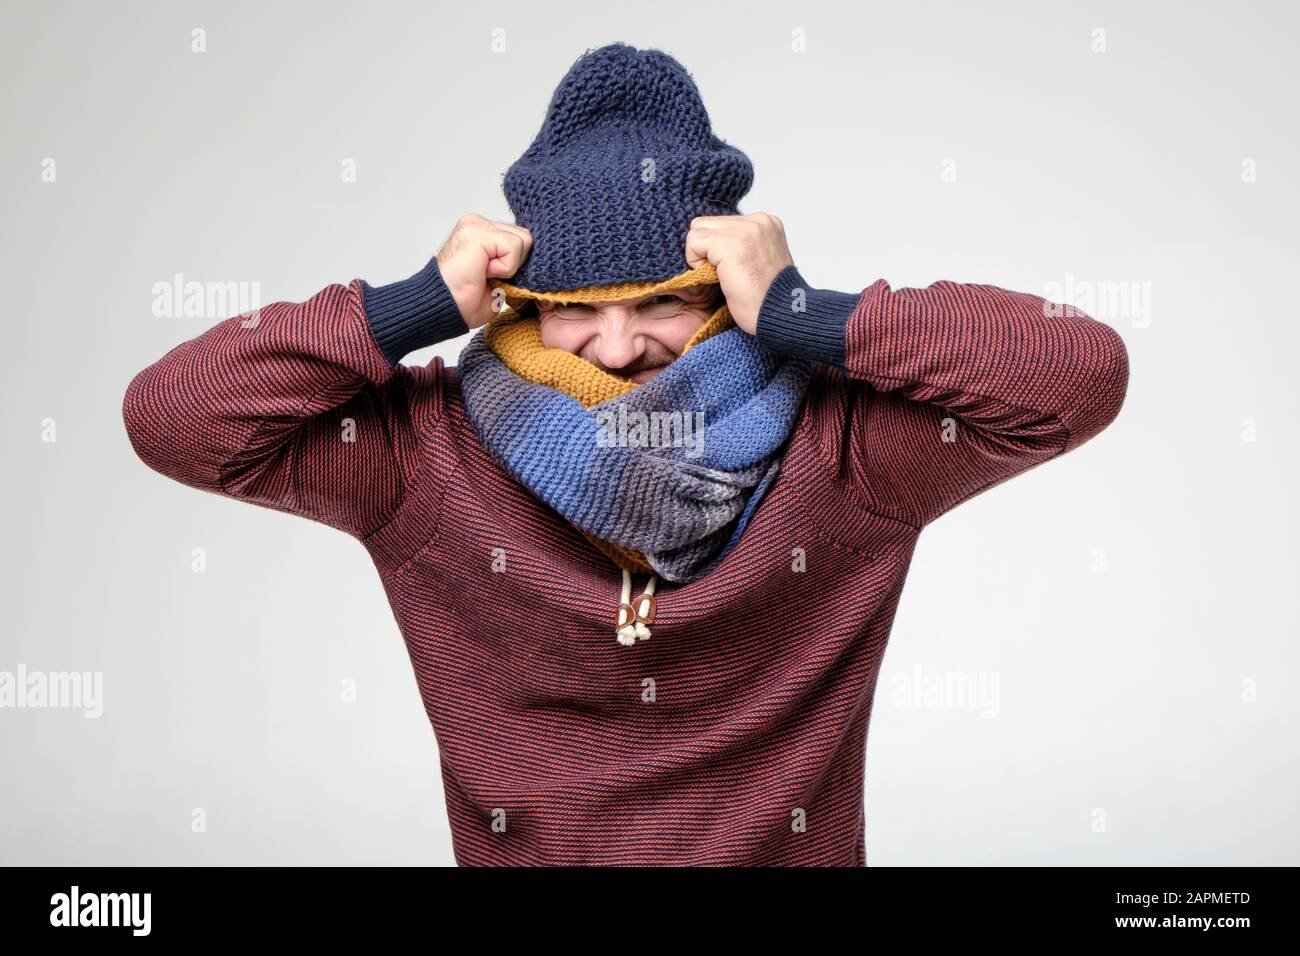 Frozen man, with a strange grimace on face, is trying to warm himself by putting on several scarves and hats. Funny fashion. Stock Photo